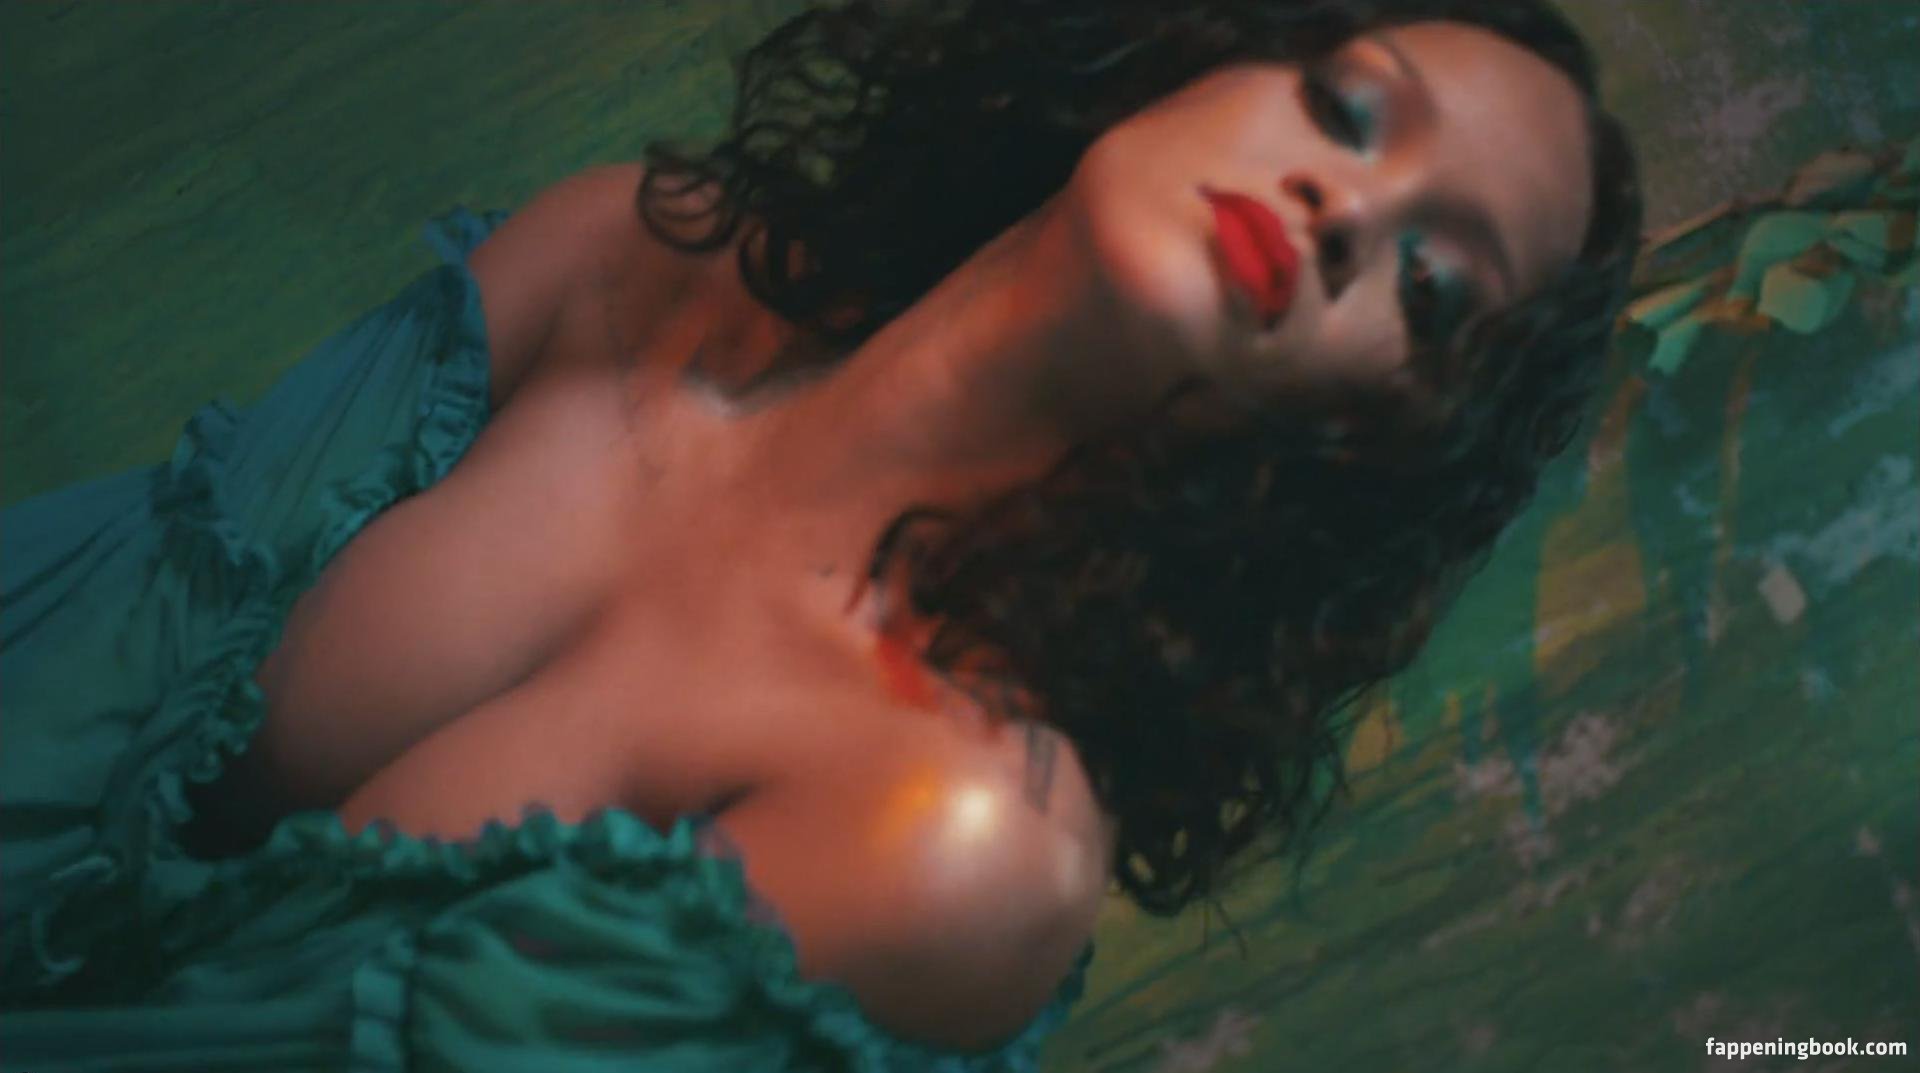 Rihanna Nude, The Fappening - Photo #456510 - FappeningBook.